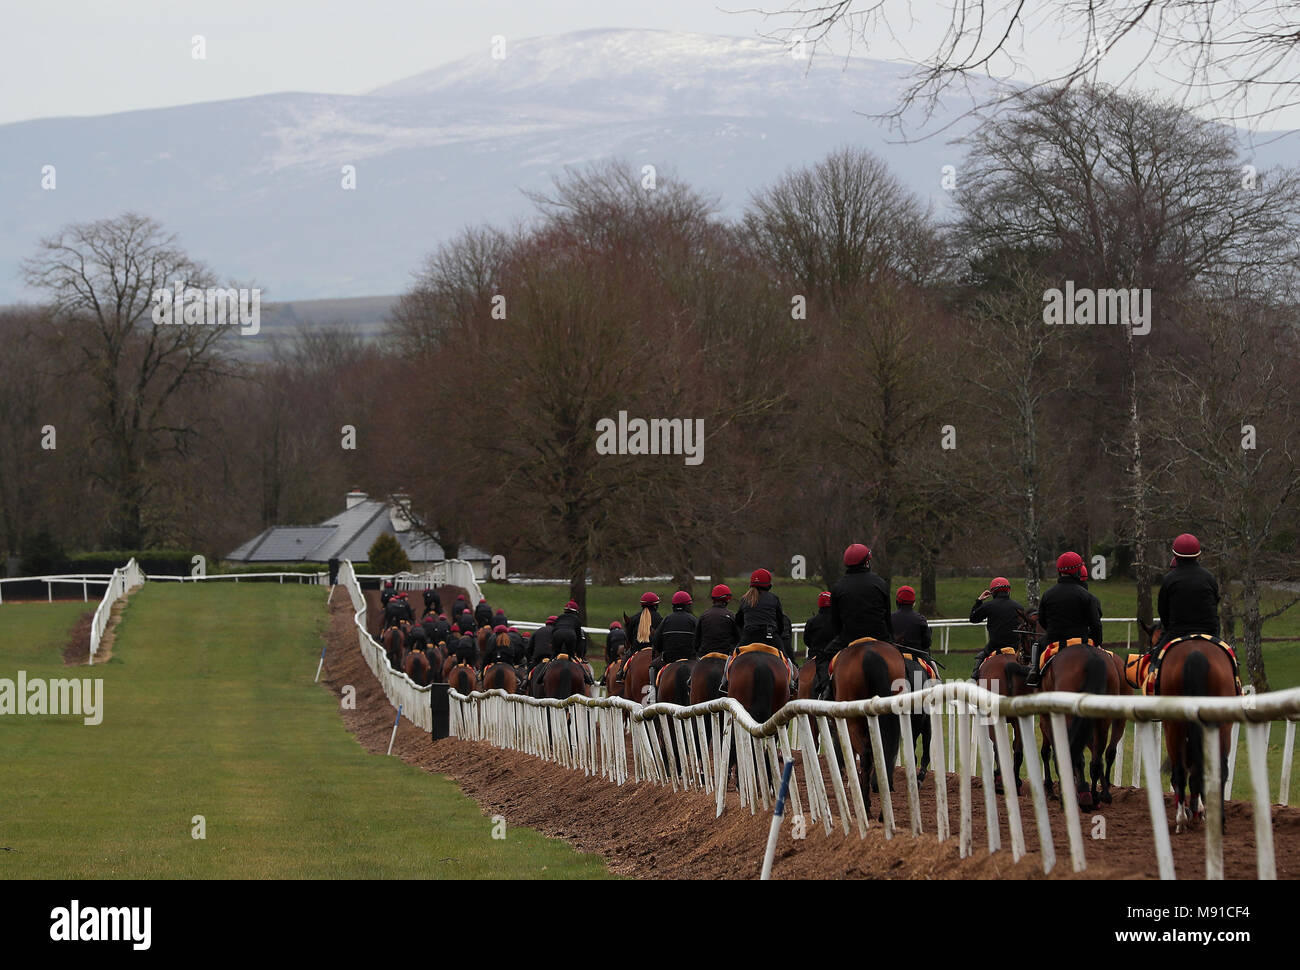 Aidan O'Brien trained horses on the gallops at Ballydoyle Racing Stables, County Tipperary, during the launch of 2018 Irish Flat Season. Stock Photo